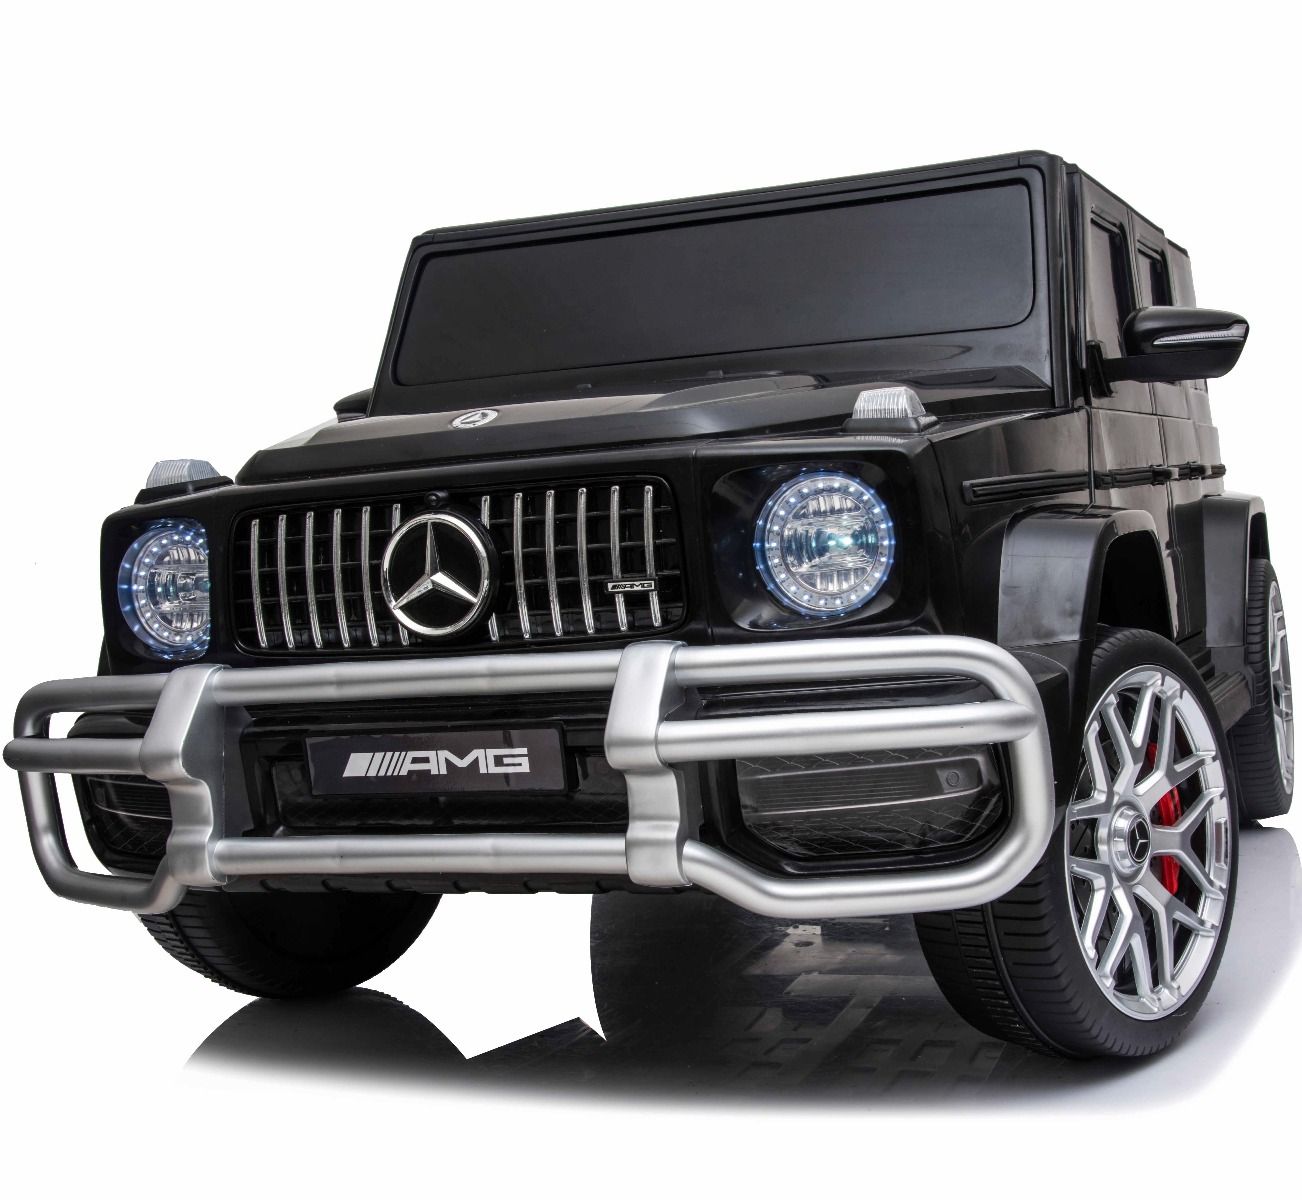 "Matte black Mercedes G-Wagon AMG G63 electric ride on 2-seater jeep with 4-wheel drive for kids on a white background"